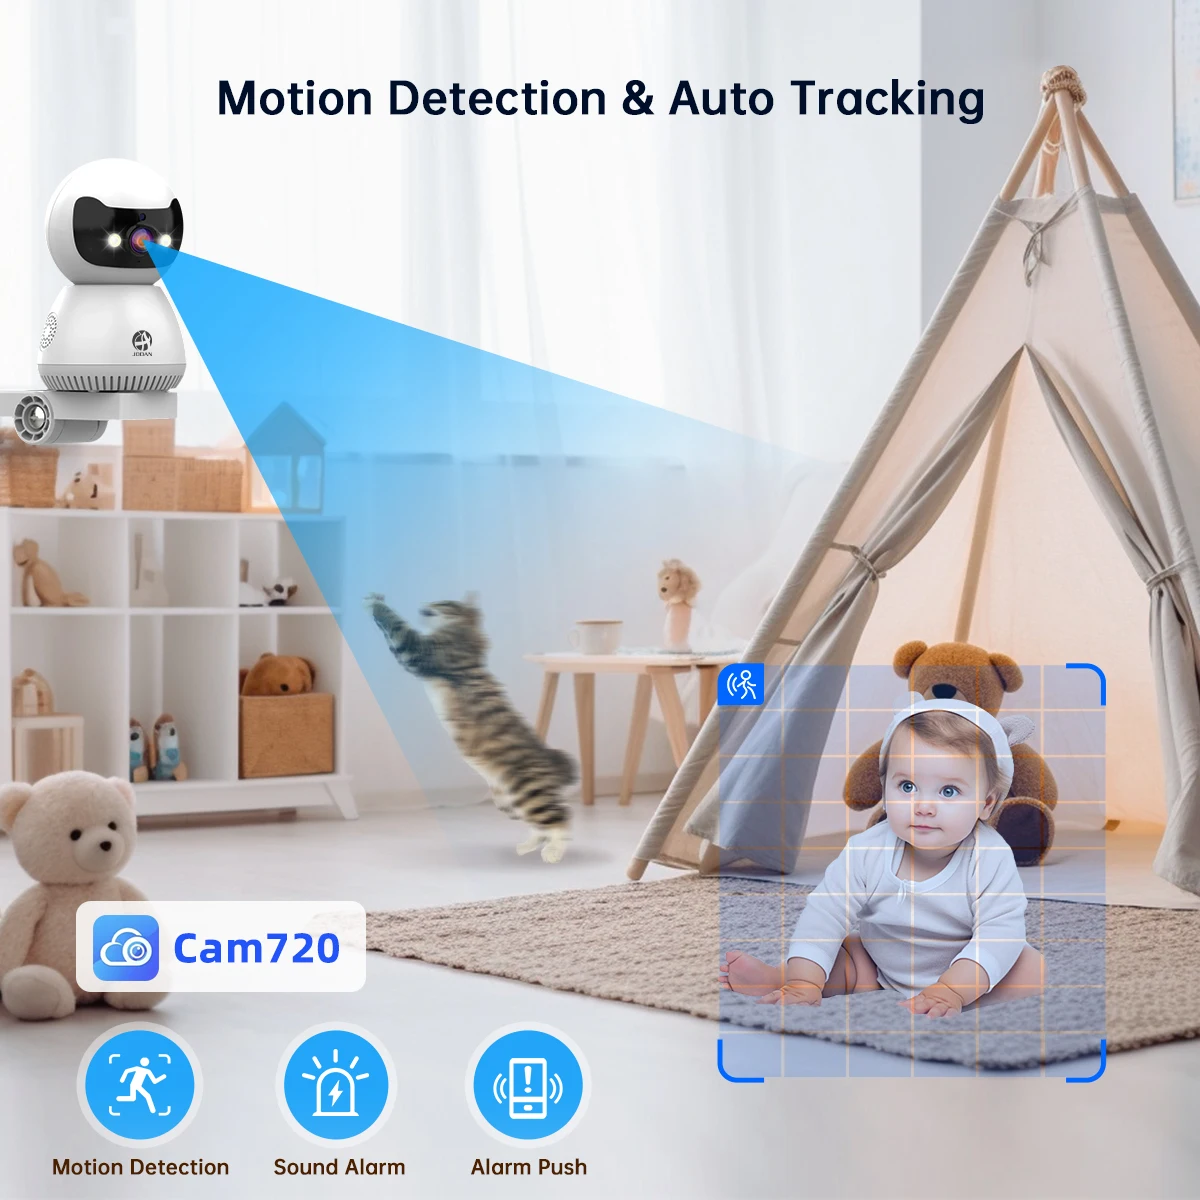 JOOAN 5MP 3MP IP Camera 5G WiFi Home Security Camera AI Tracking Video Surveillance Camera Color Night Vision Smart Baby Monitor 2